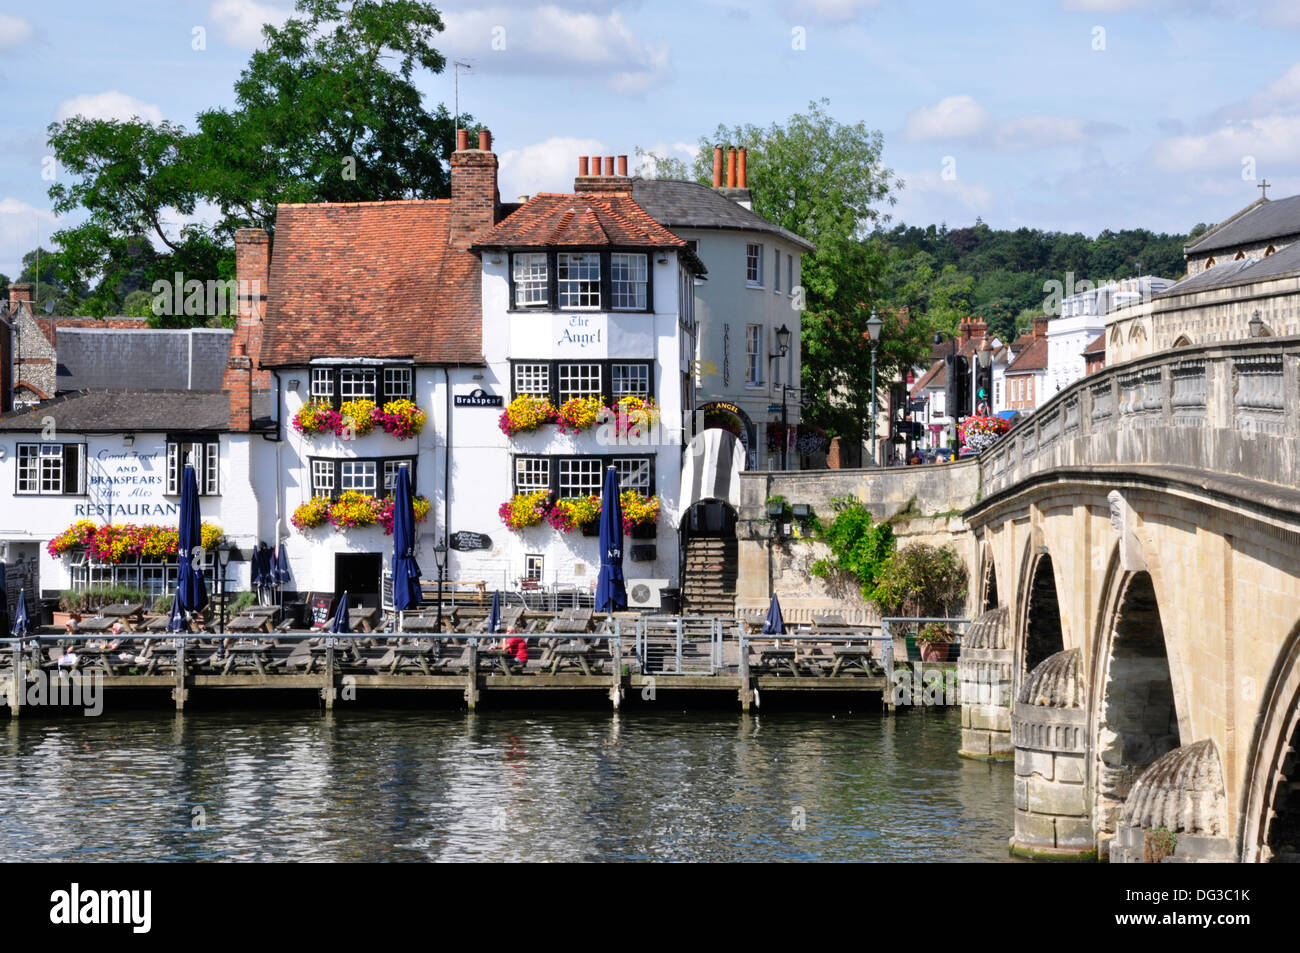 Oxon - Henley on Thames -view to Angel inn - beside old town bridge - colourful and inviting - overlooking the river Stock Photo